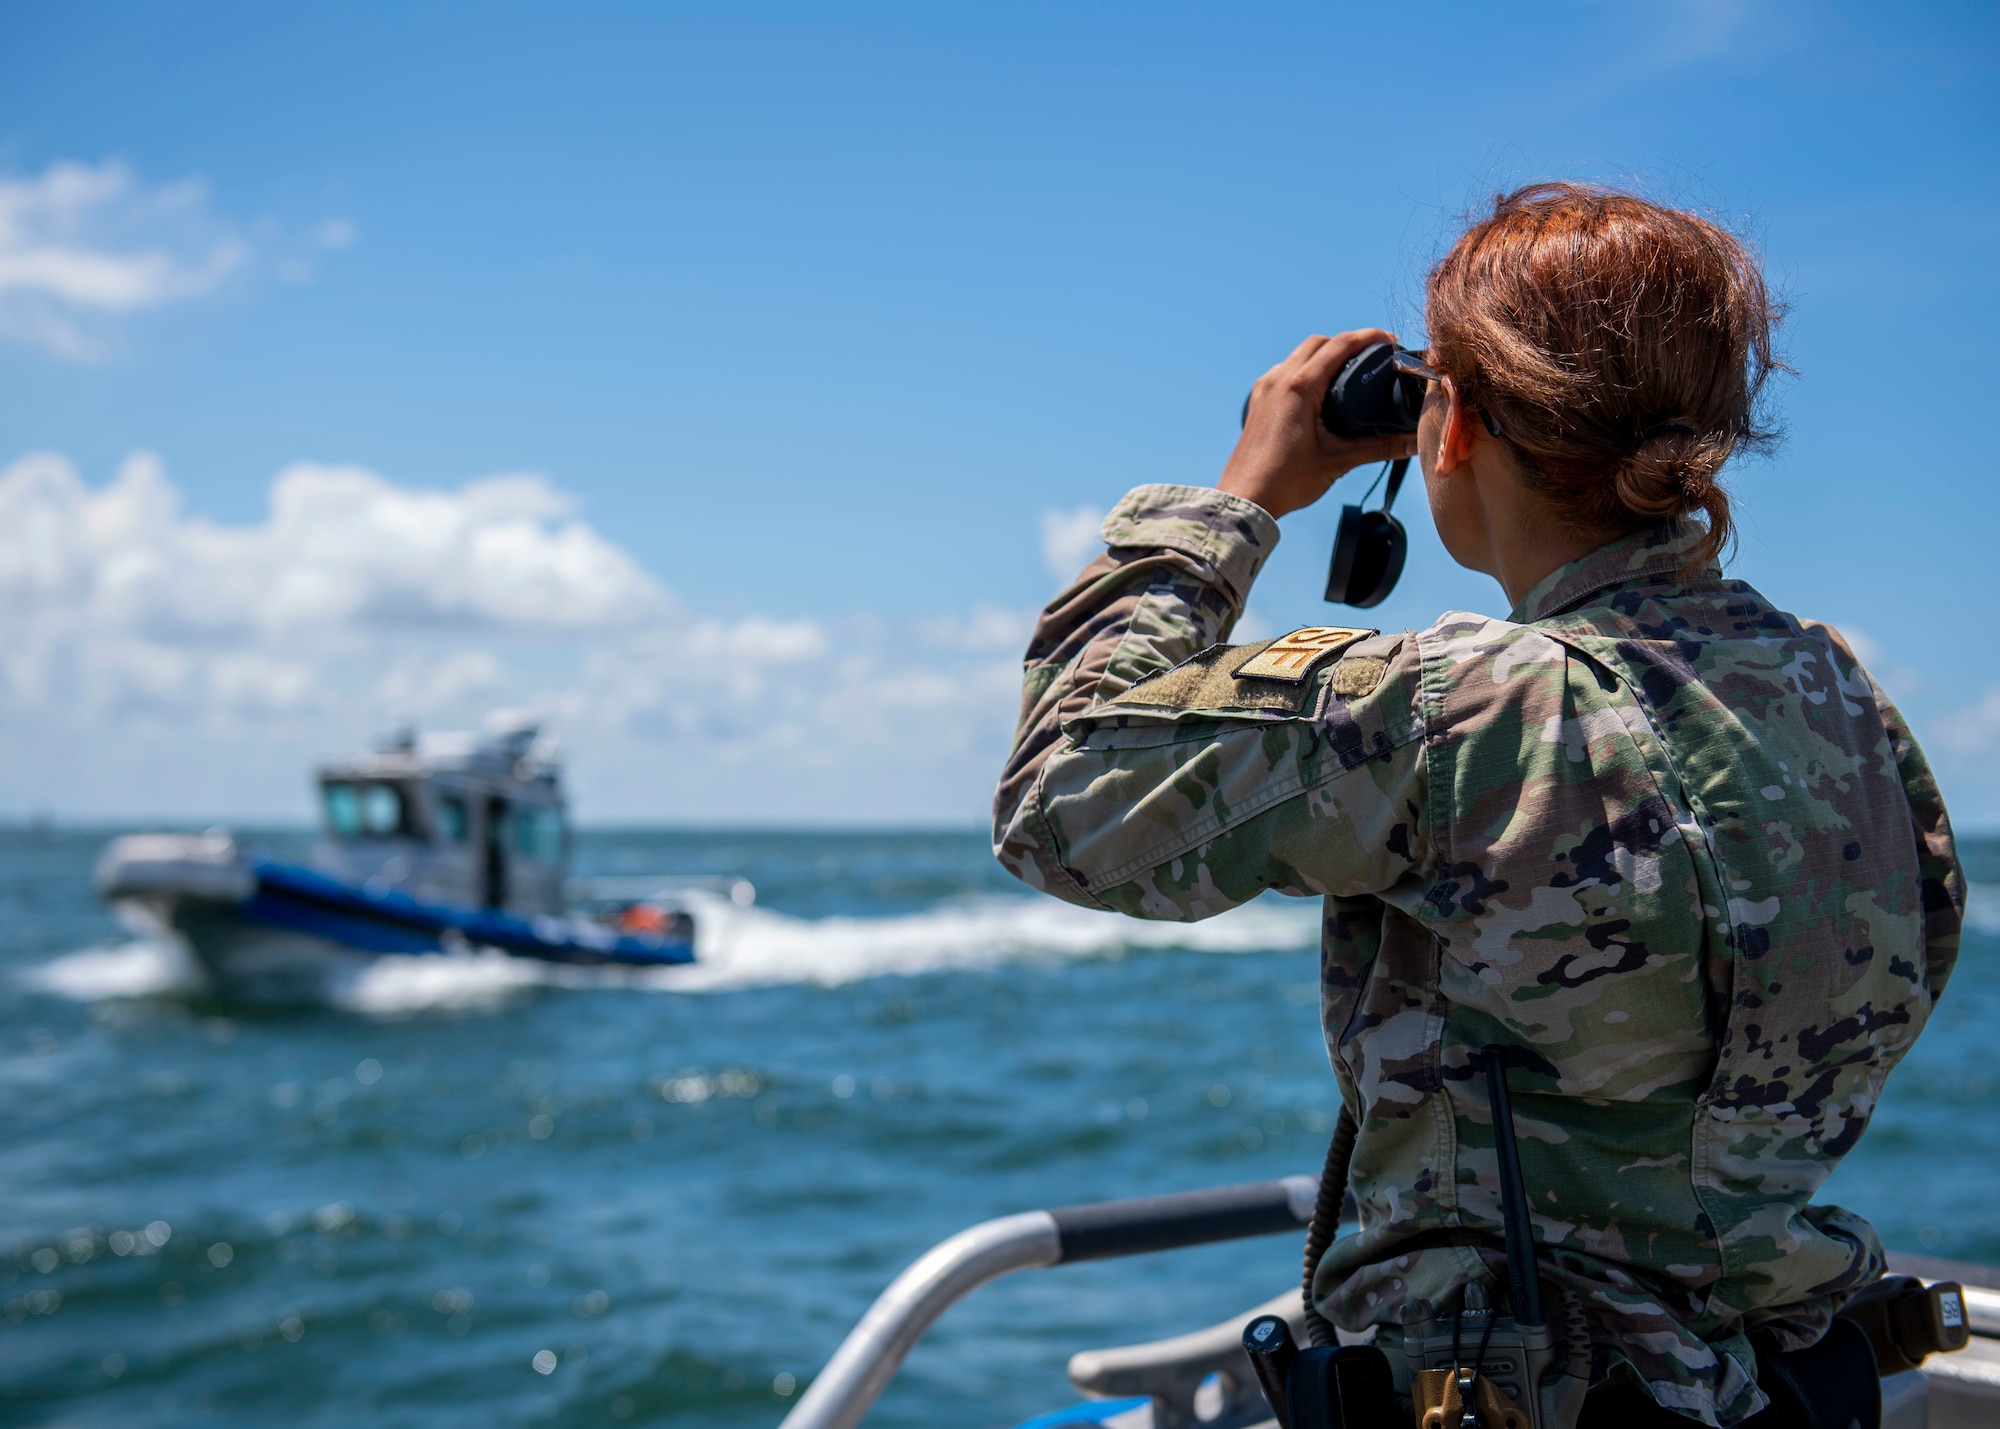 U.S. Air Force Airman 1st Class Samari Rivera-Rodriguez, 6th Security Forces Squadron marine patrolman, scans the waters surrounding MacDill Air Force Base, Florida, July 10, 2022. Marine patrolmen provide waterborne deterrence, detection and respond to any threat within MacDill’s surrounding waters. The 6th SFS marine patrol unit is responsible for one of the largest CRA’s in the Department of Defense and is the only 24/7 unit in the U.S. Air Force. (U.S. Air Force photo by Airman 1st Class Lauren Cobin)